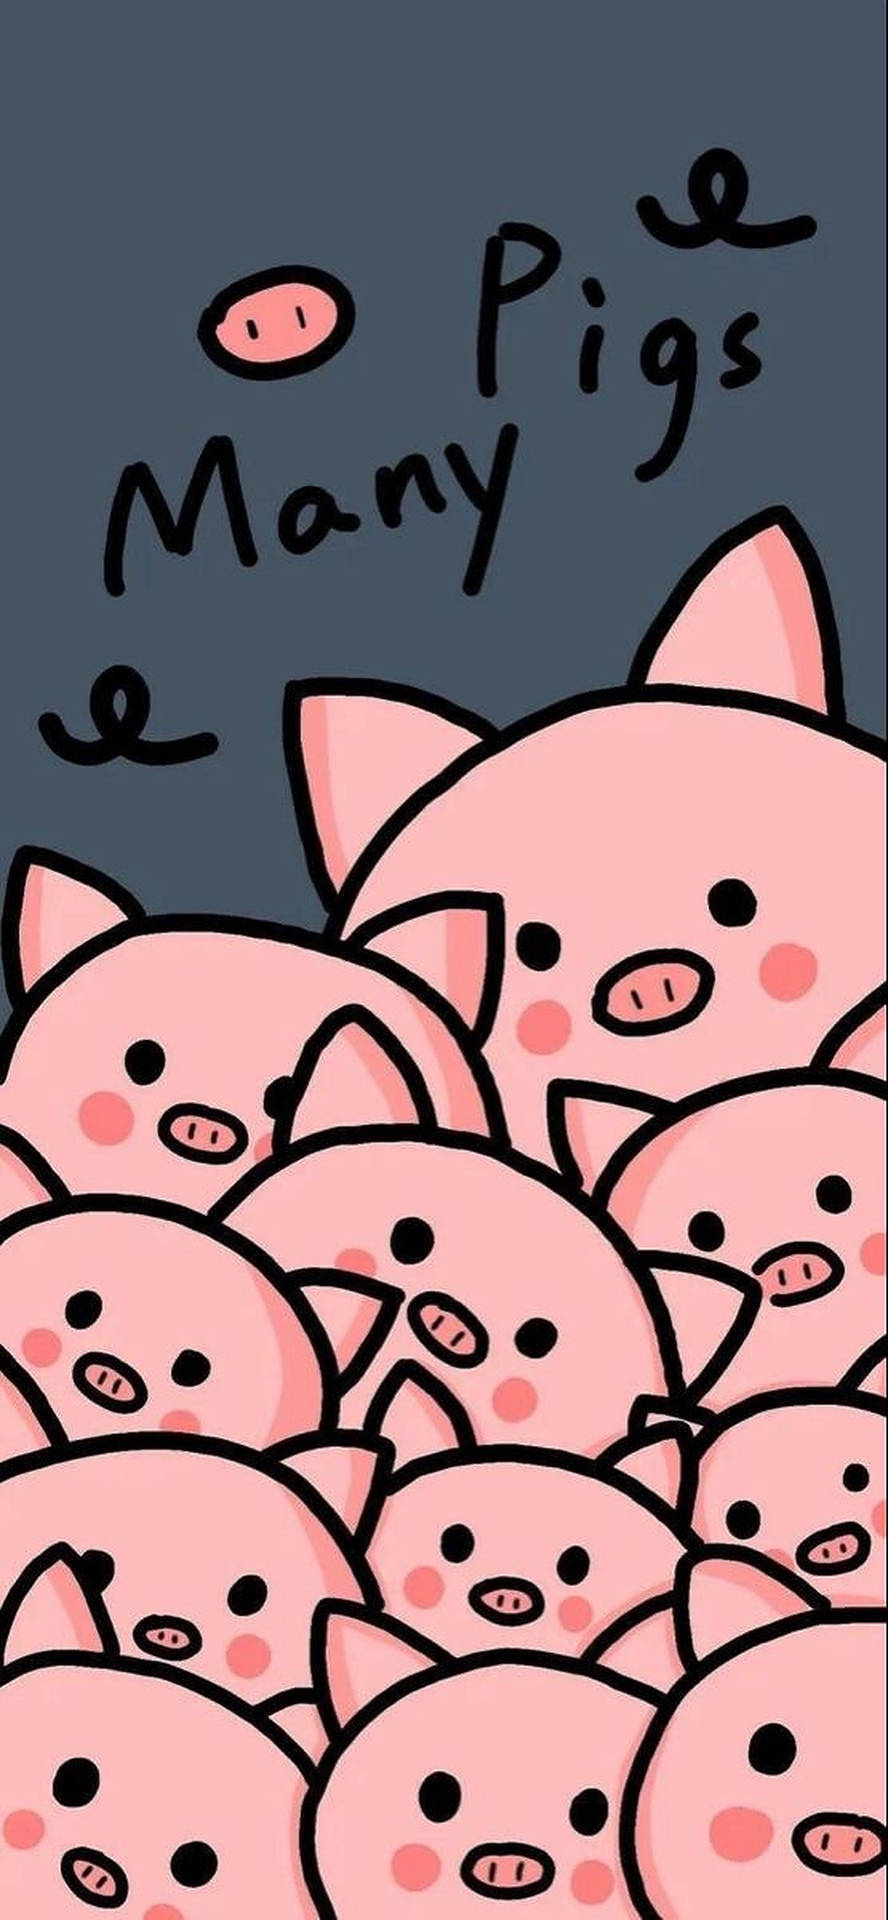 Cute Pigs Doodle Background